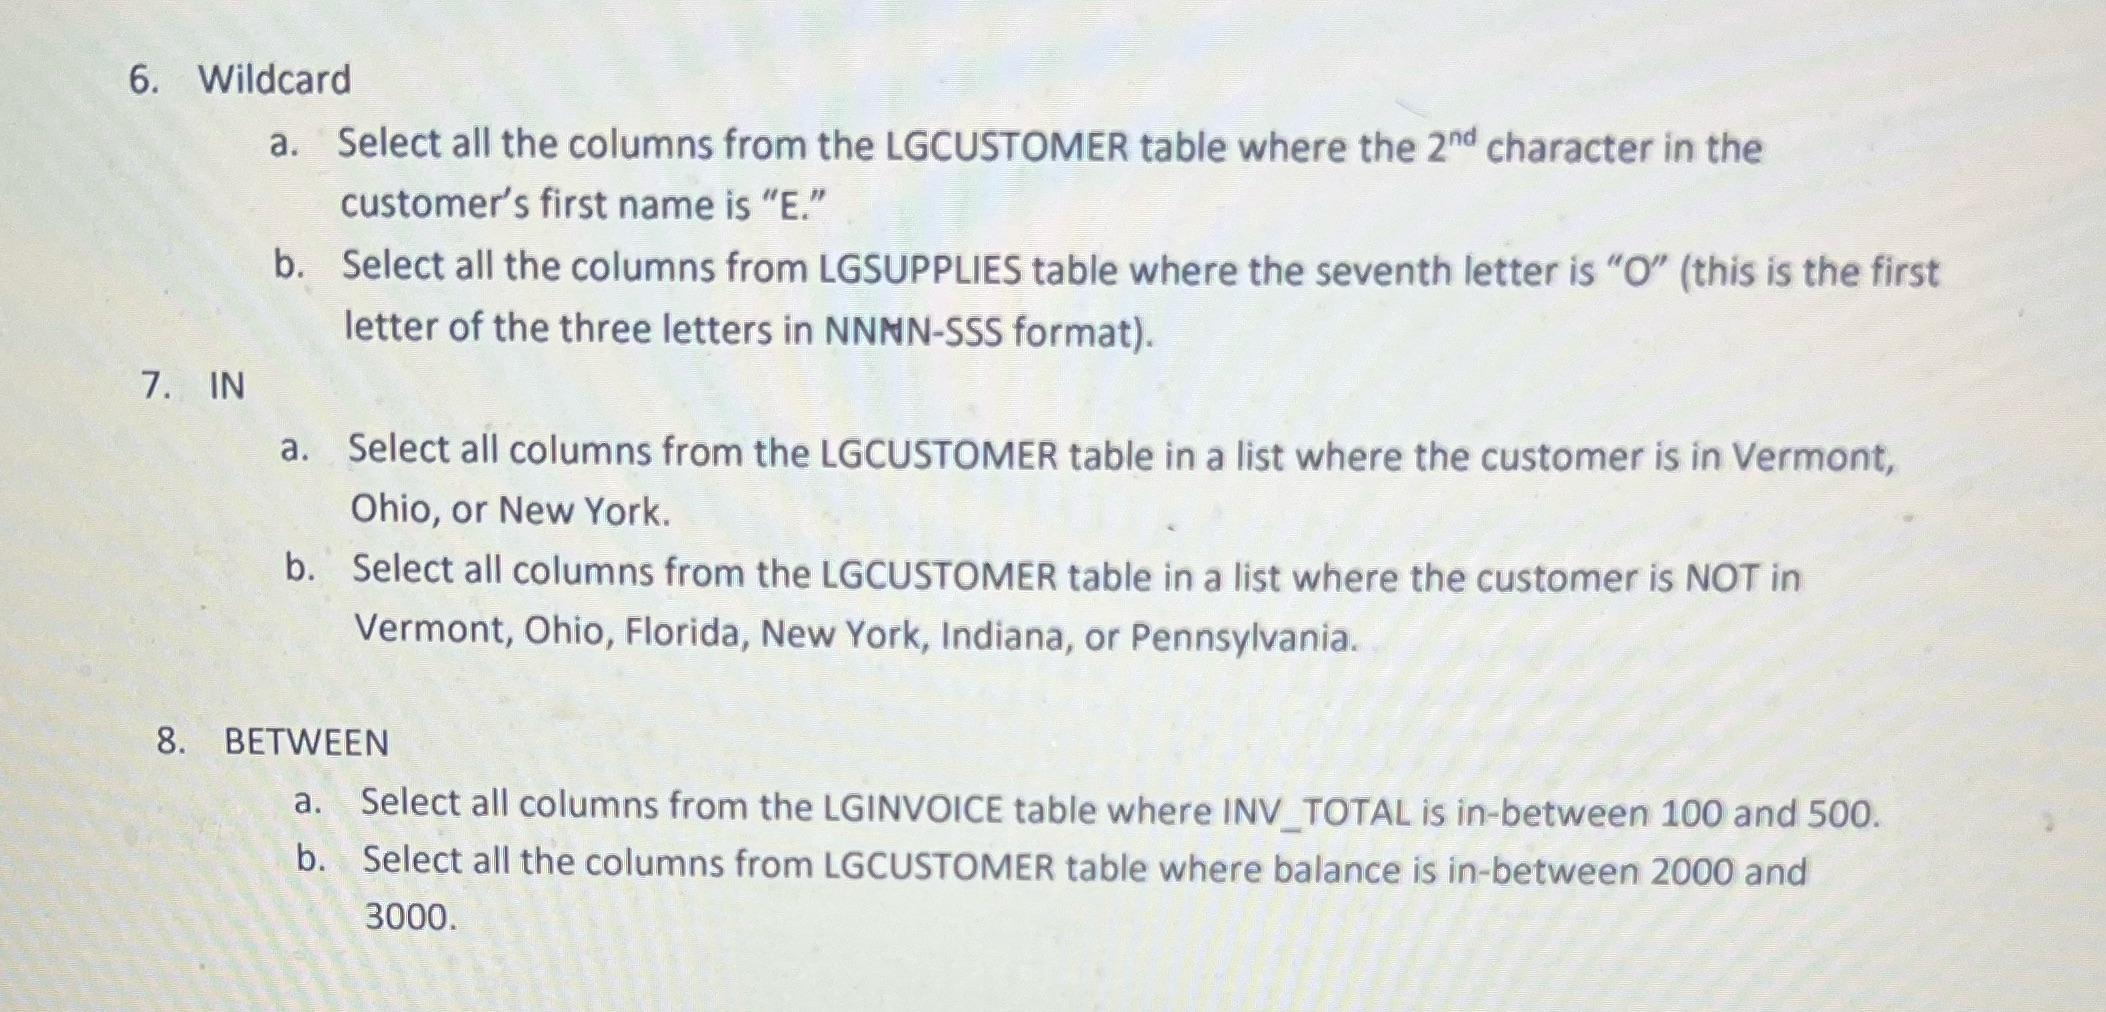 6. Wildcard a. Select all the columns from the LGCUSTOMER table where the 2nd character in the customer's